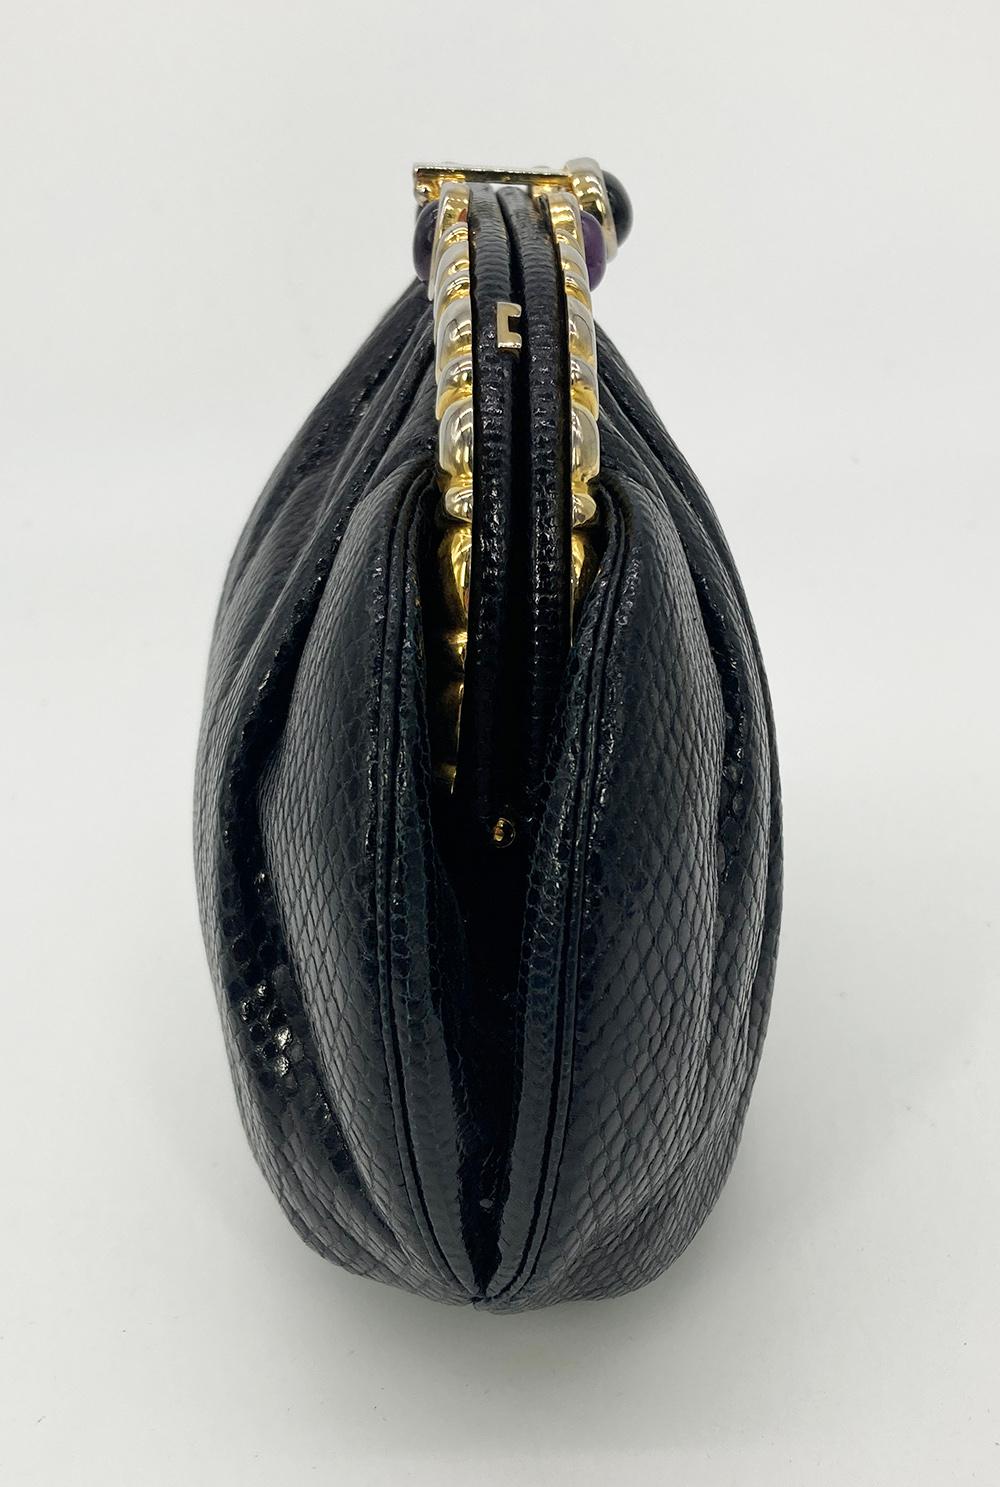 Judith Leiber Black Lizard Purple & Black Gemstone Top Clutch in good condition. Black lizard exterior trimmed with gold hardware and black and purple gemstones along top edge. Lift latch closure opens to a black silk interior with 2 side slit